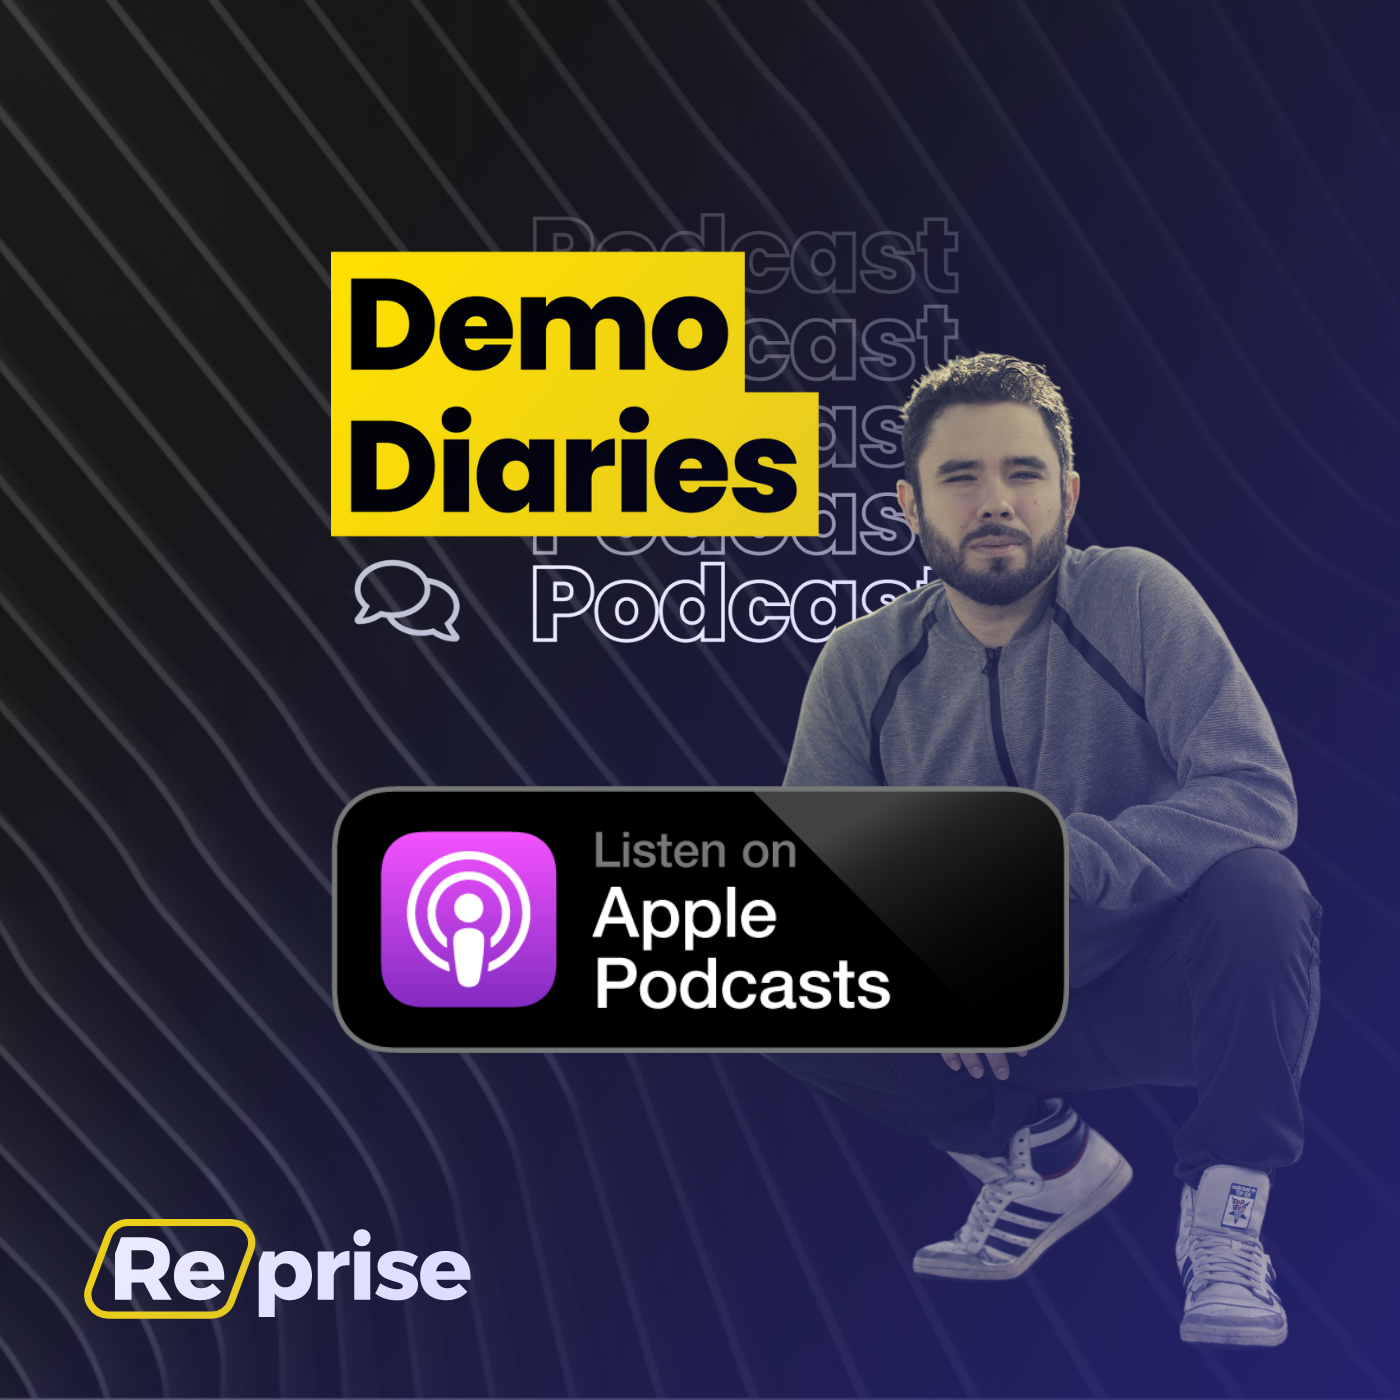 Demo Diaries recap, ep. 22: Give Your Customers Space And They’ll Come Back When The Time Is Ready